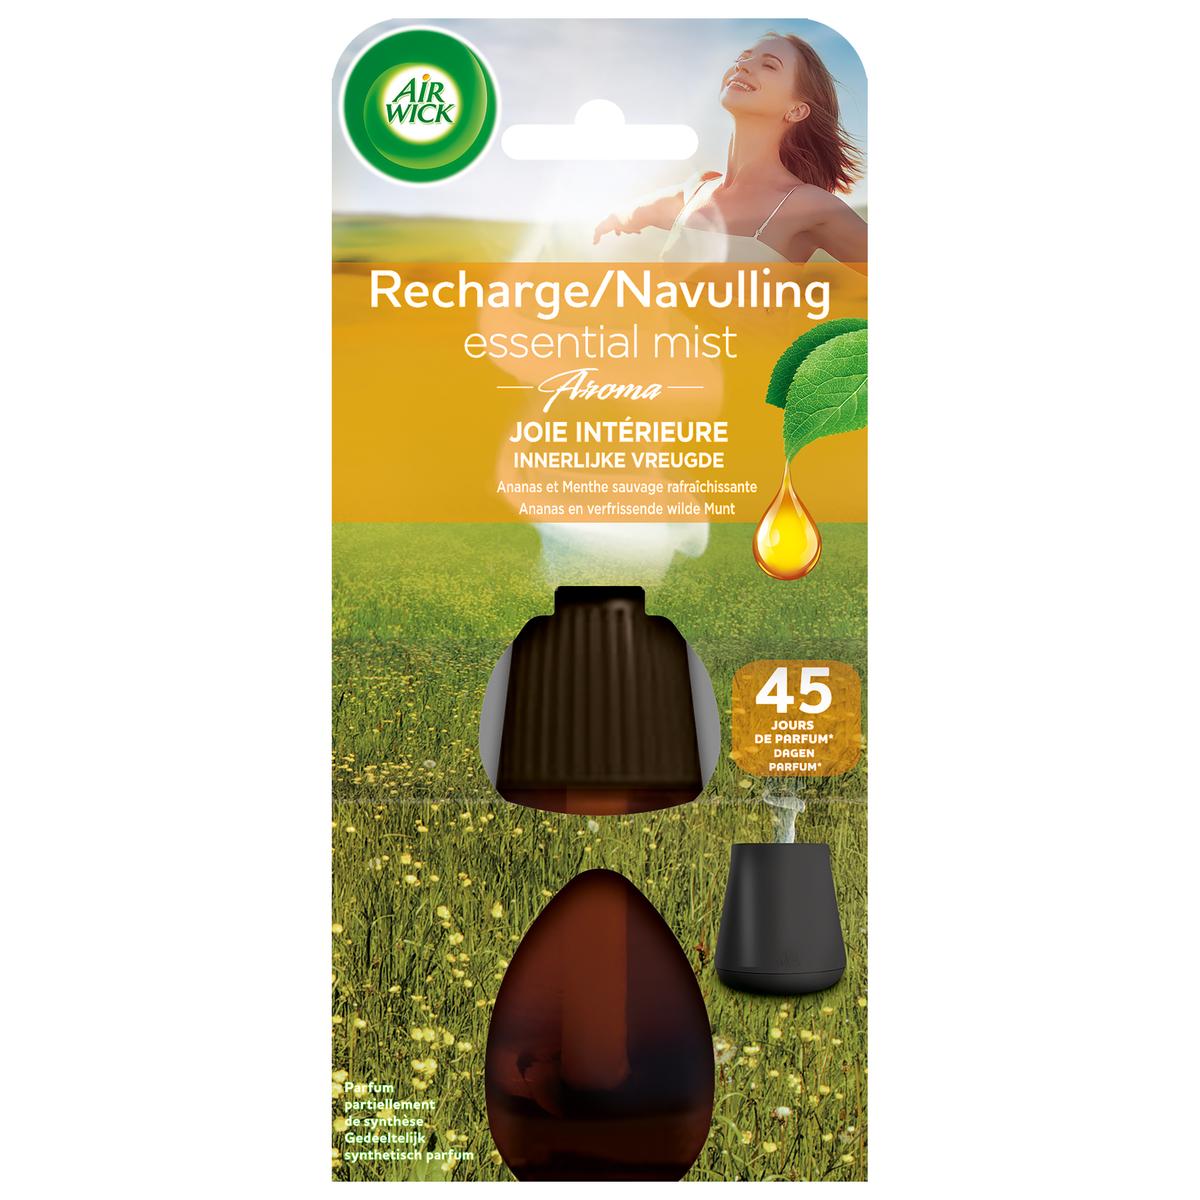 Achat Air Wick Recharge Diffuseur d'Huiles Essentielles Ananas